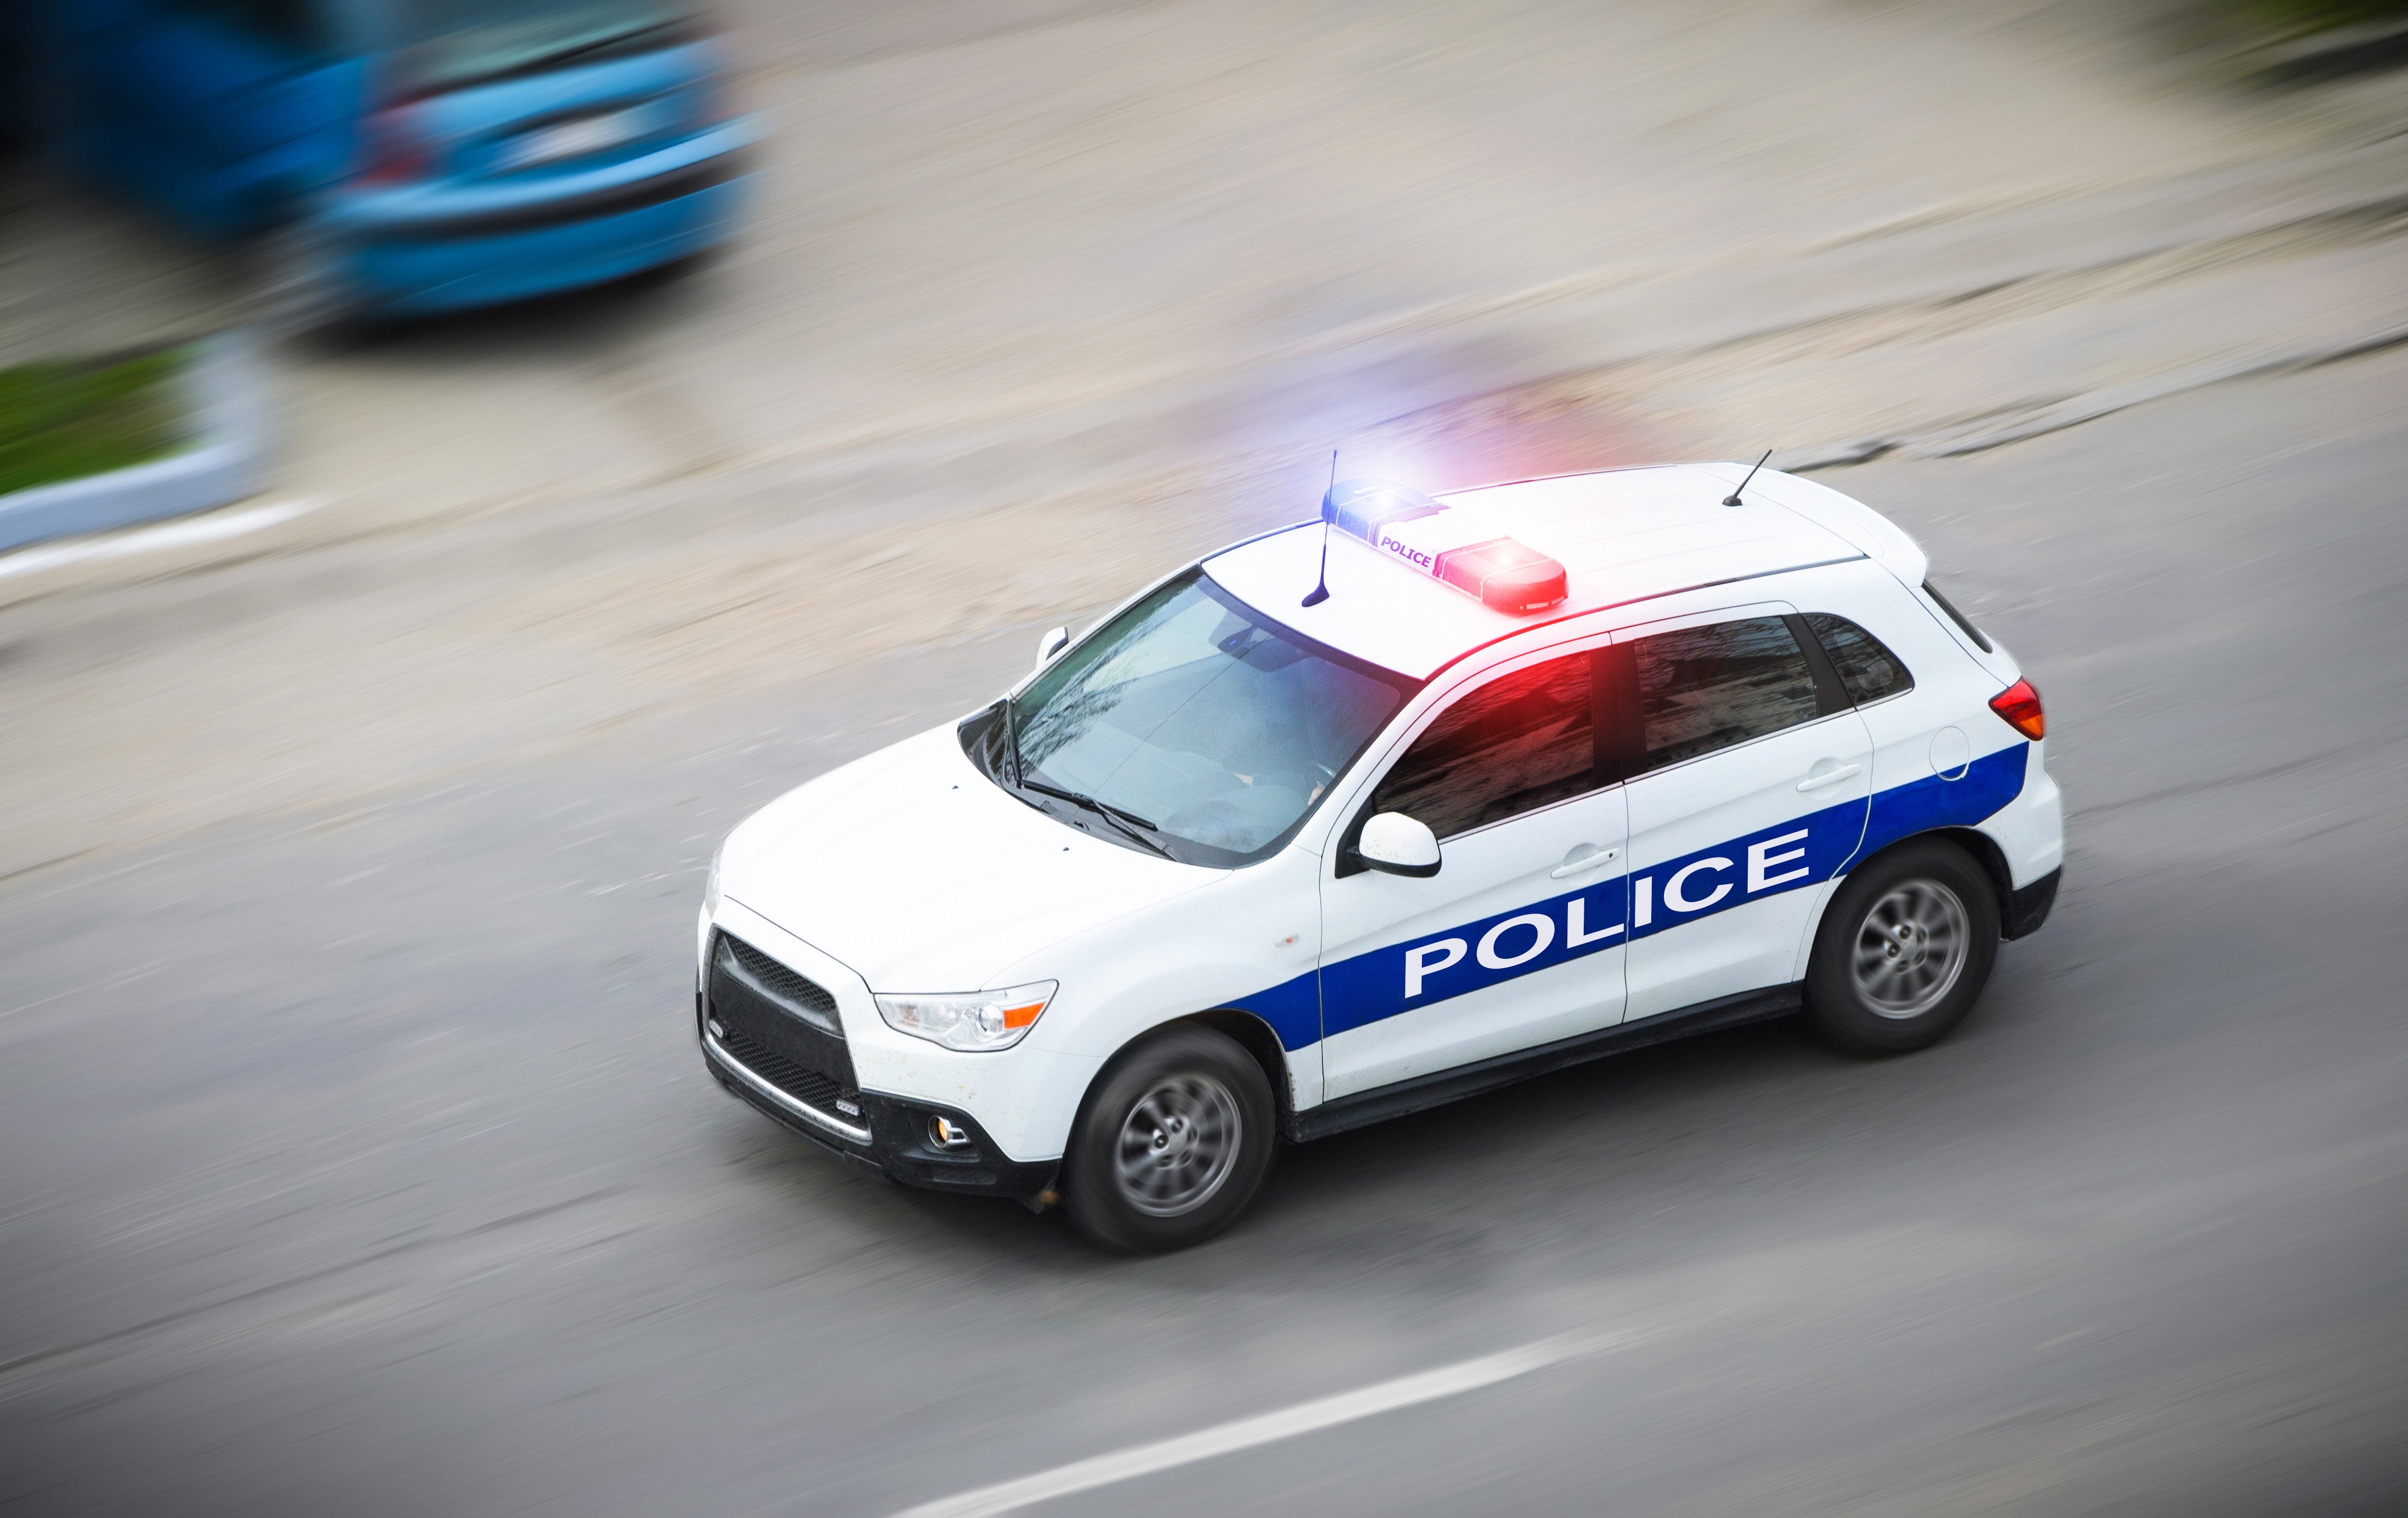 Police car in motion. | Photo: Shutterstock